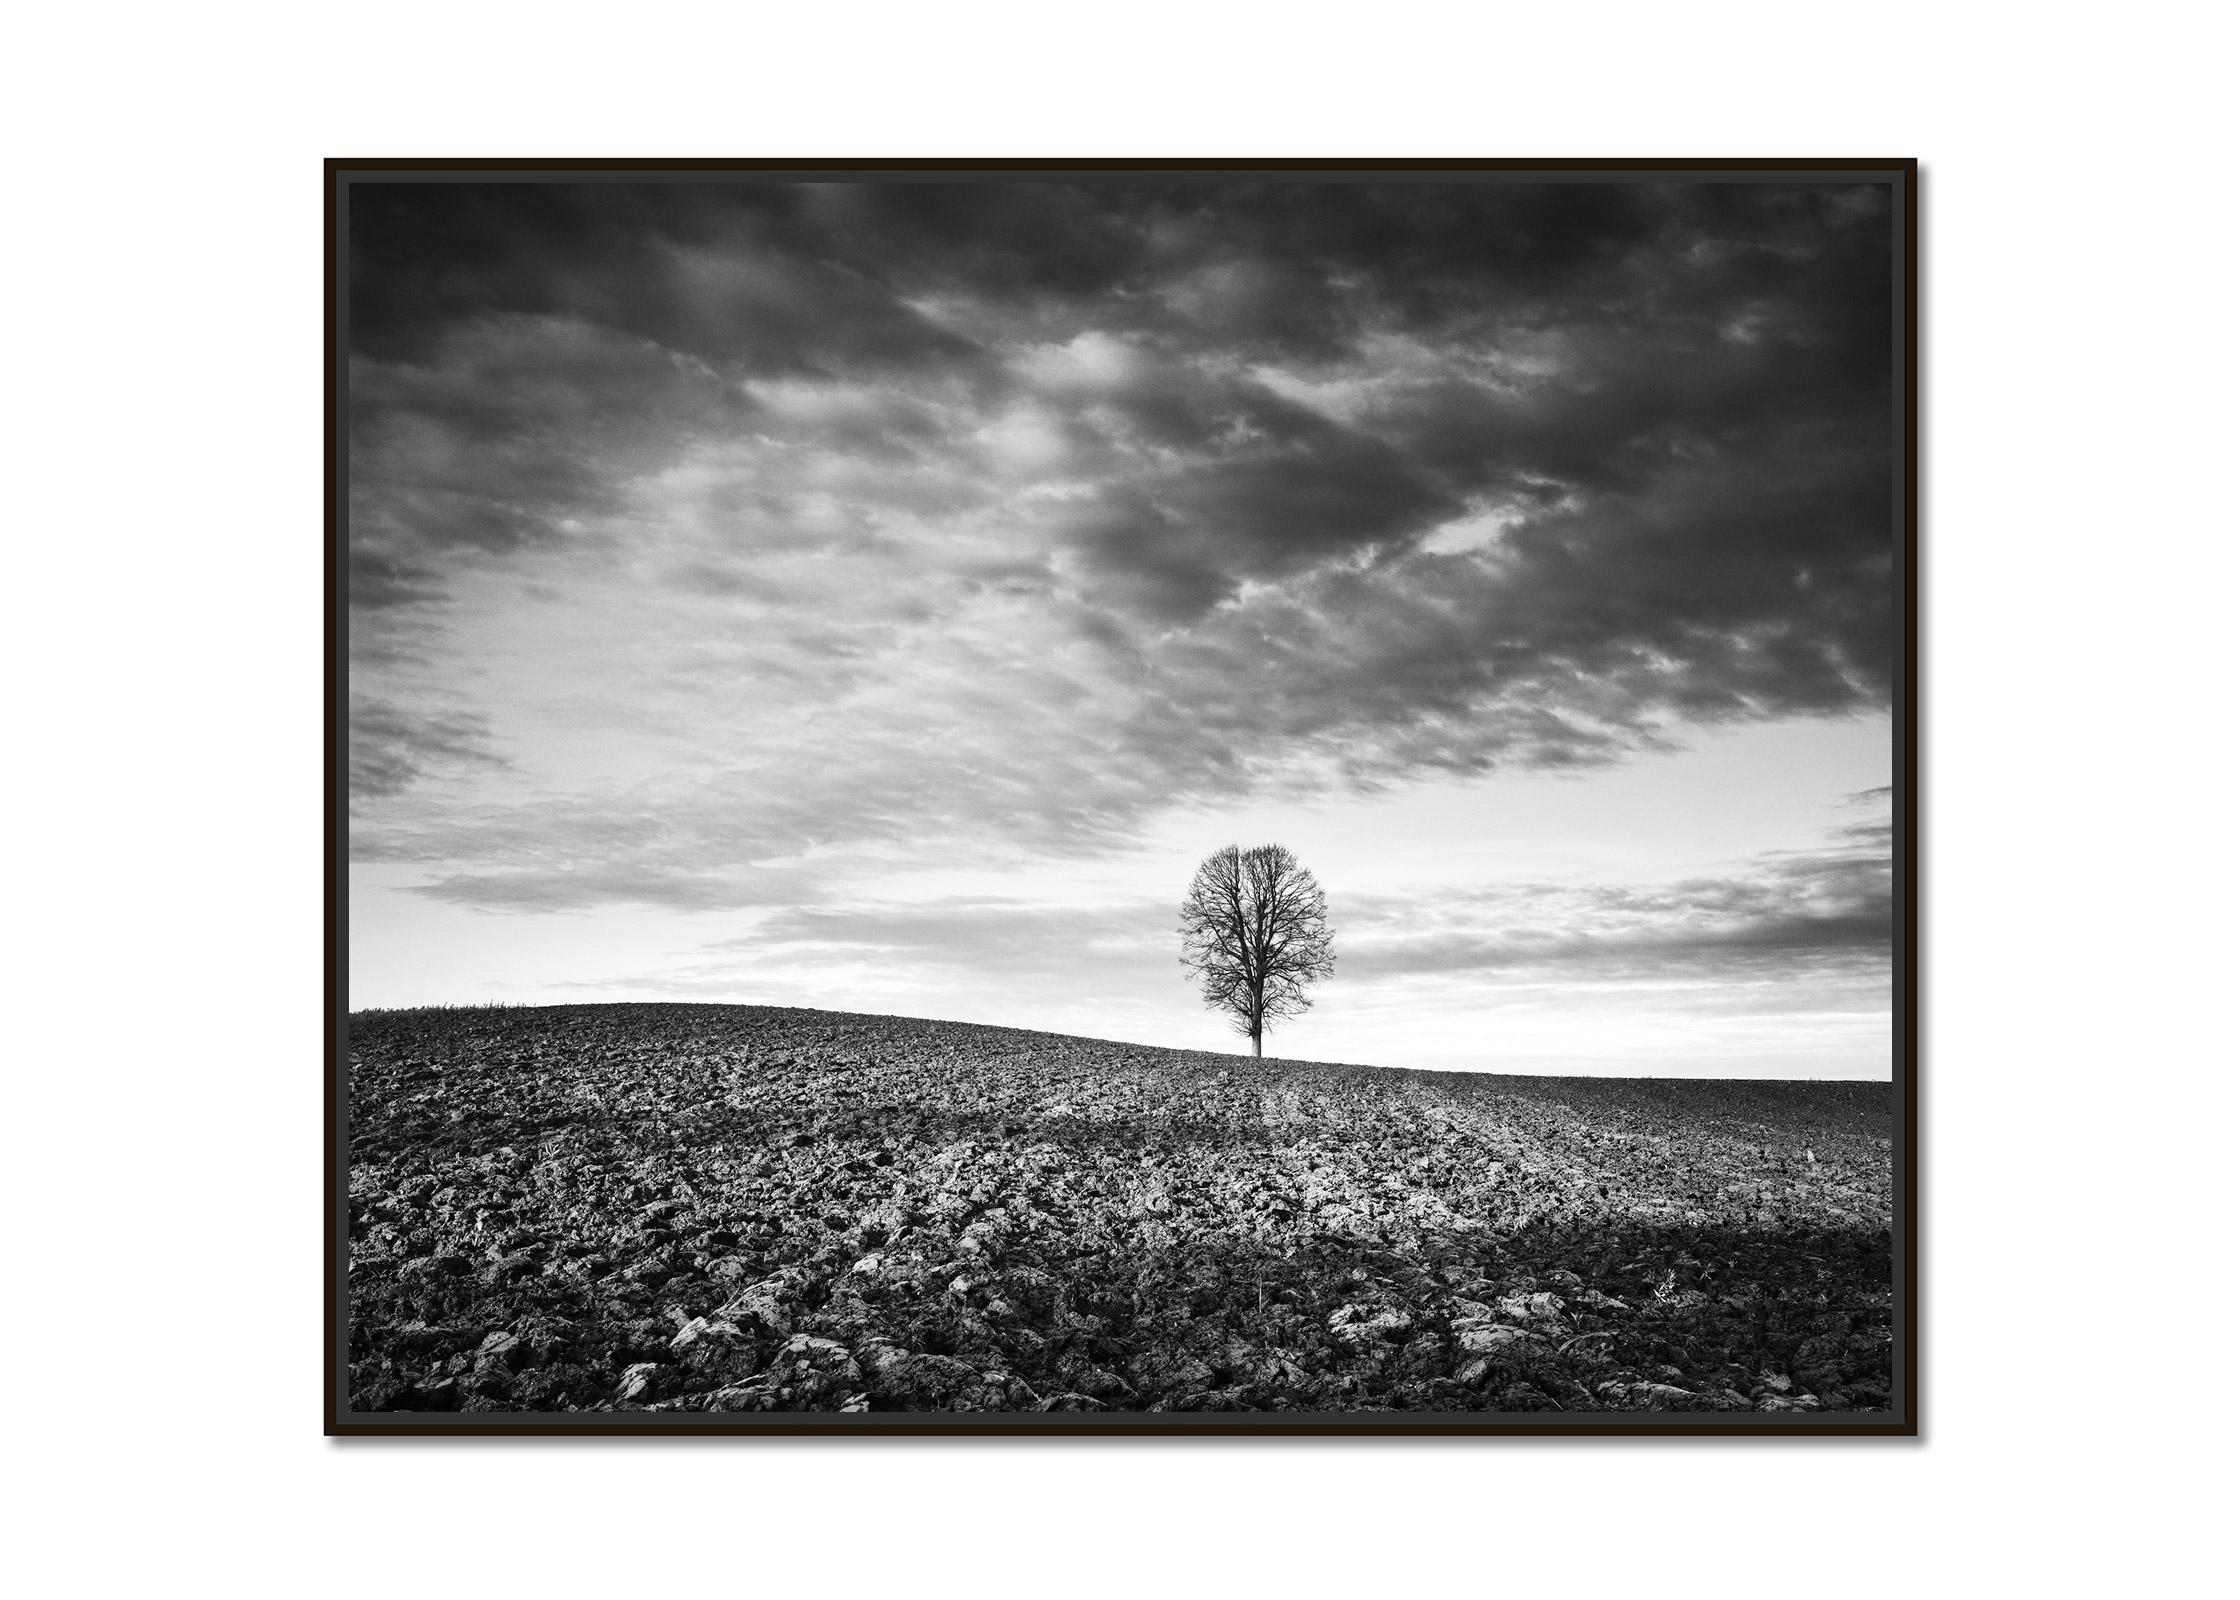 Lonely Tree, Storm, Field, black and white fine art landscape photography print - Photograph by Gerald Berghammer